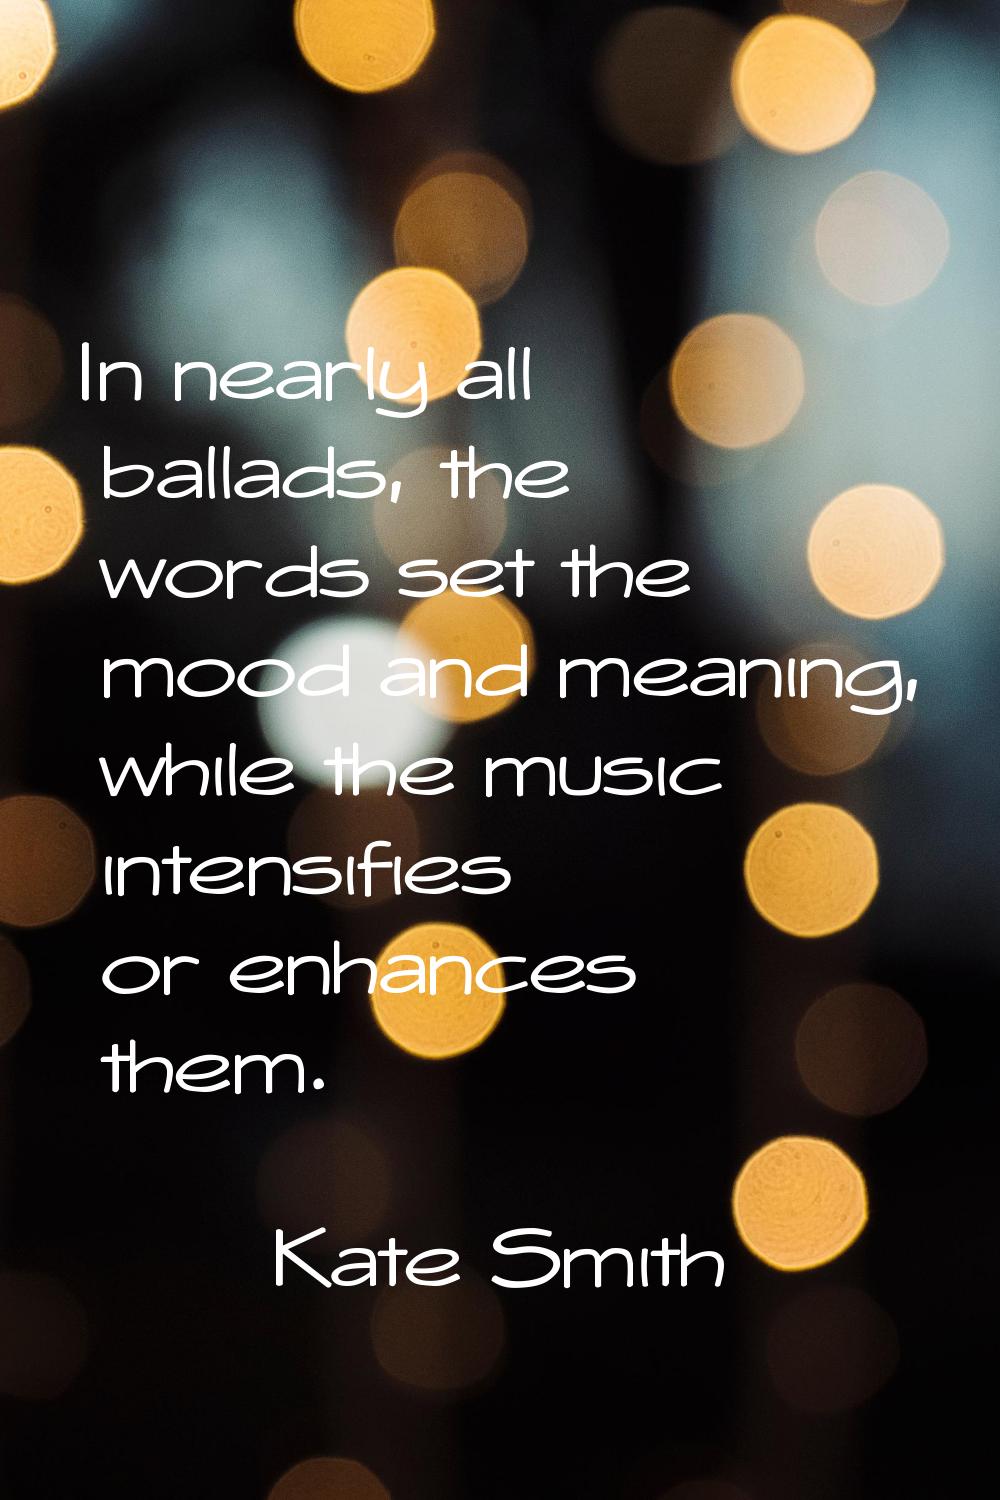 In nearly all ballads, the words set the mood and meaning, while the music intensifies or enhances 